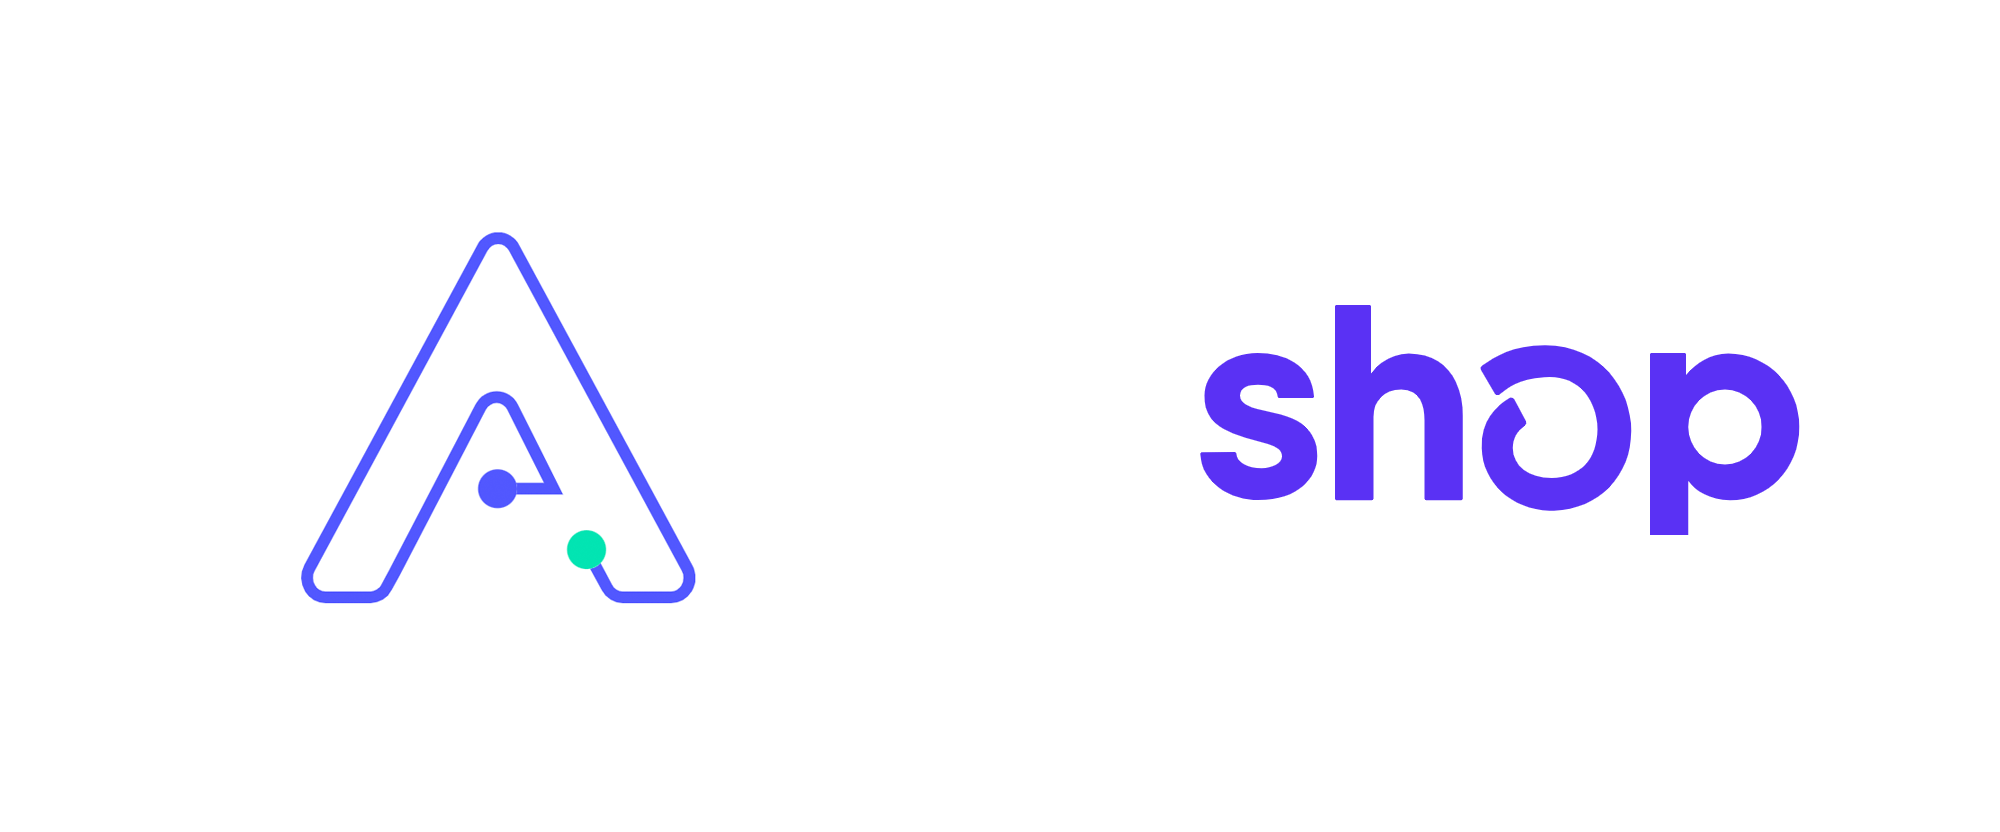 Brand New: New Name and Logo for Shop